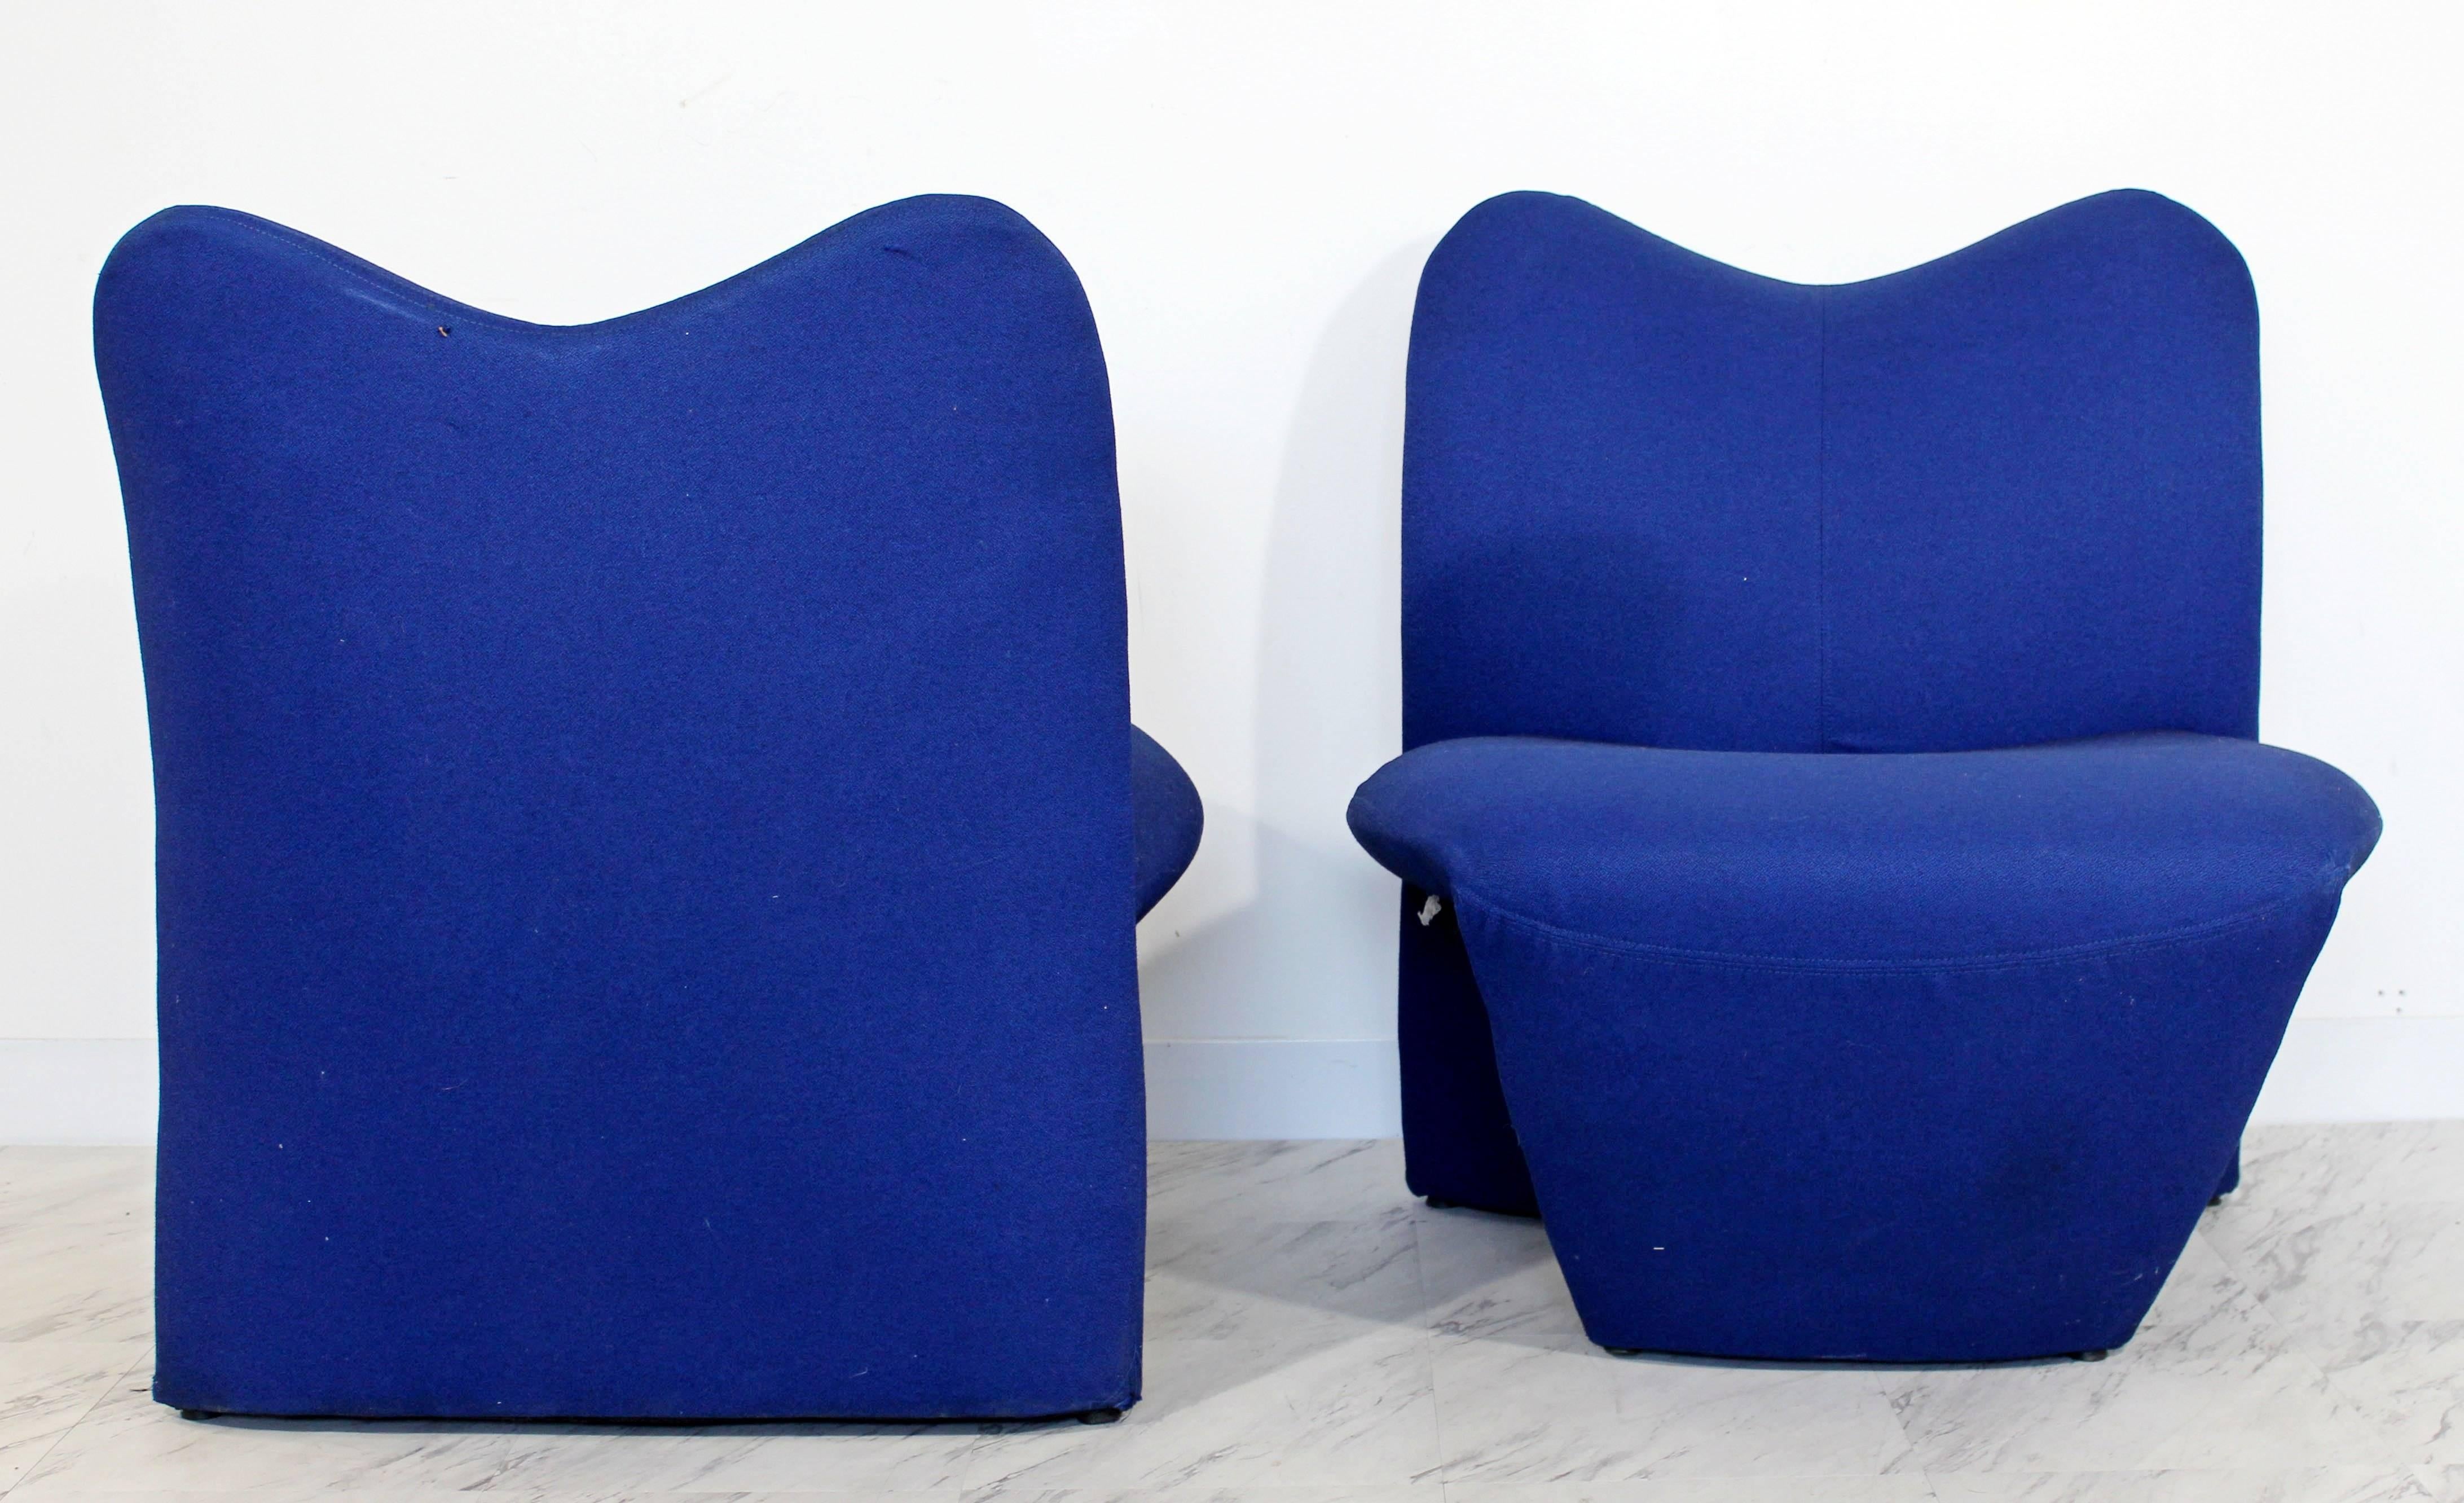 Late 20th Century Mid-Century Modern Pair of Sculpted Accent Chairs Paulin Panton Style Italian